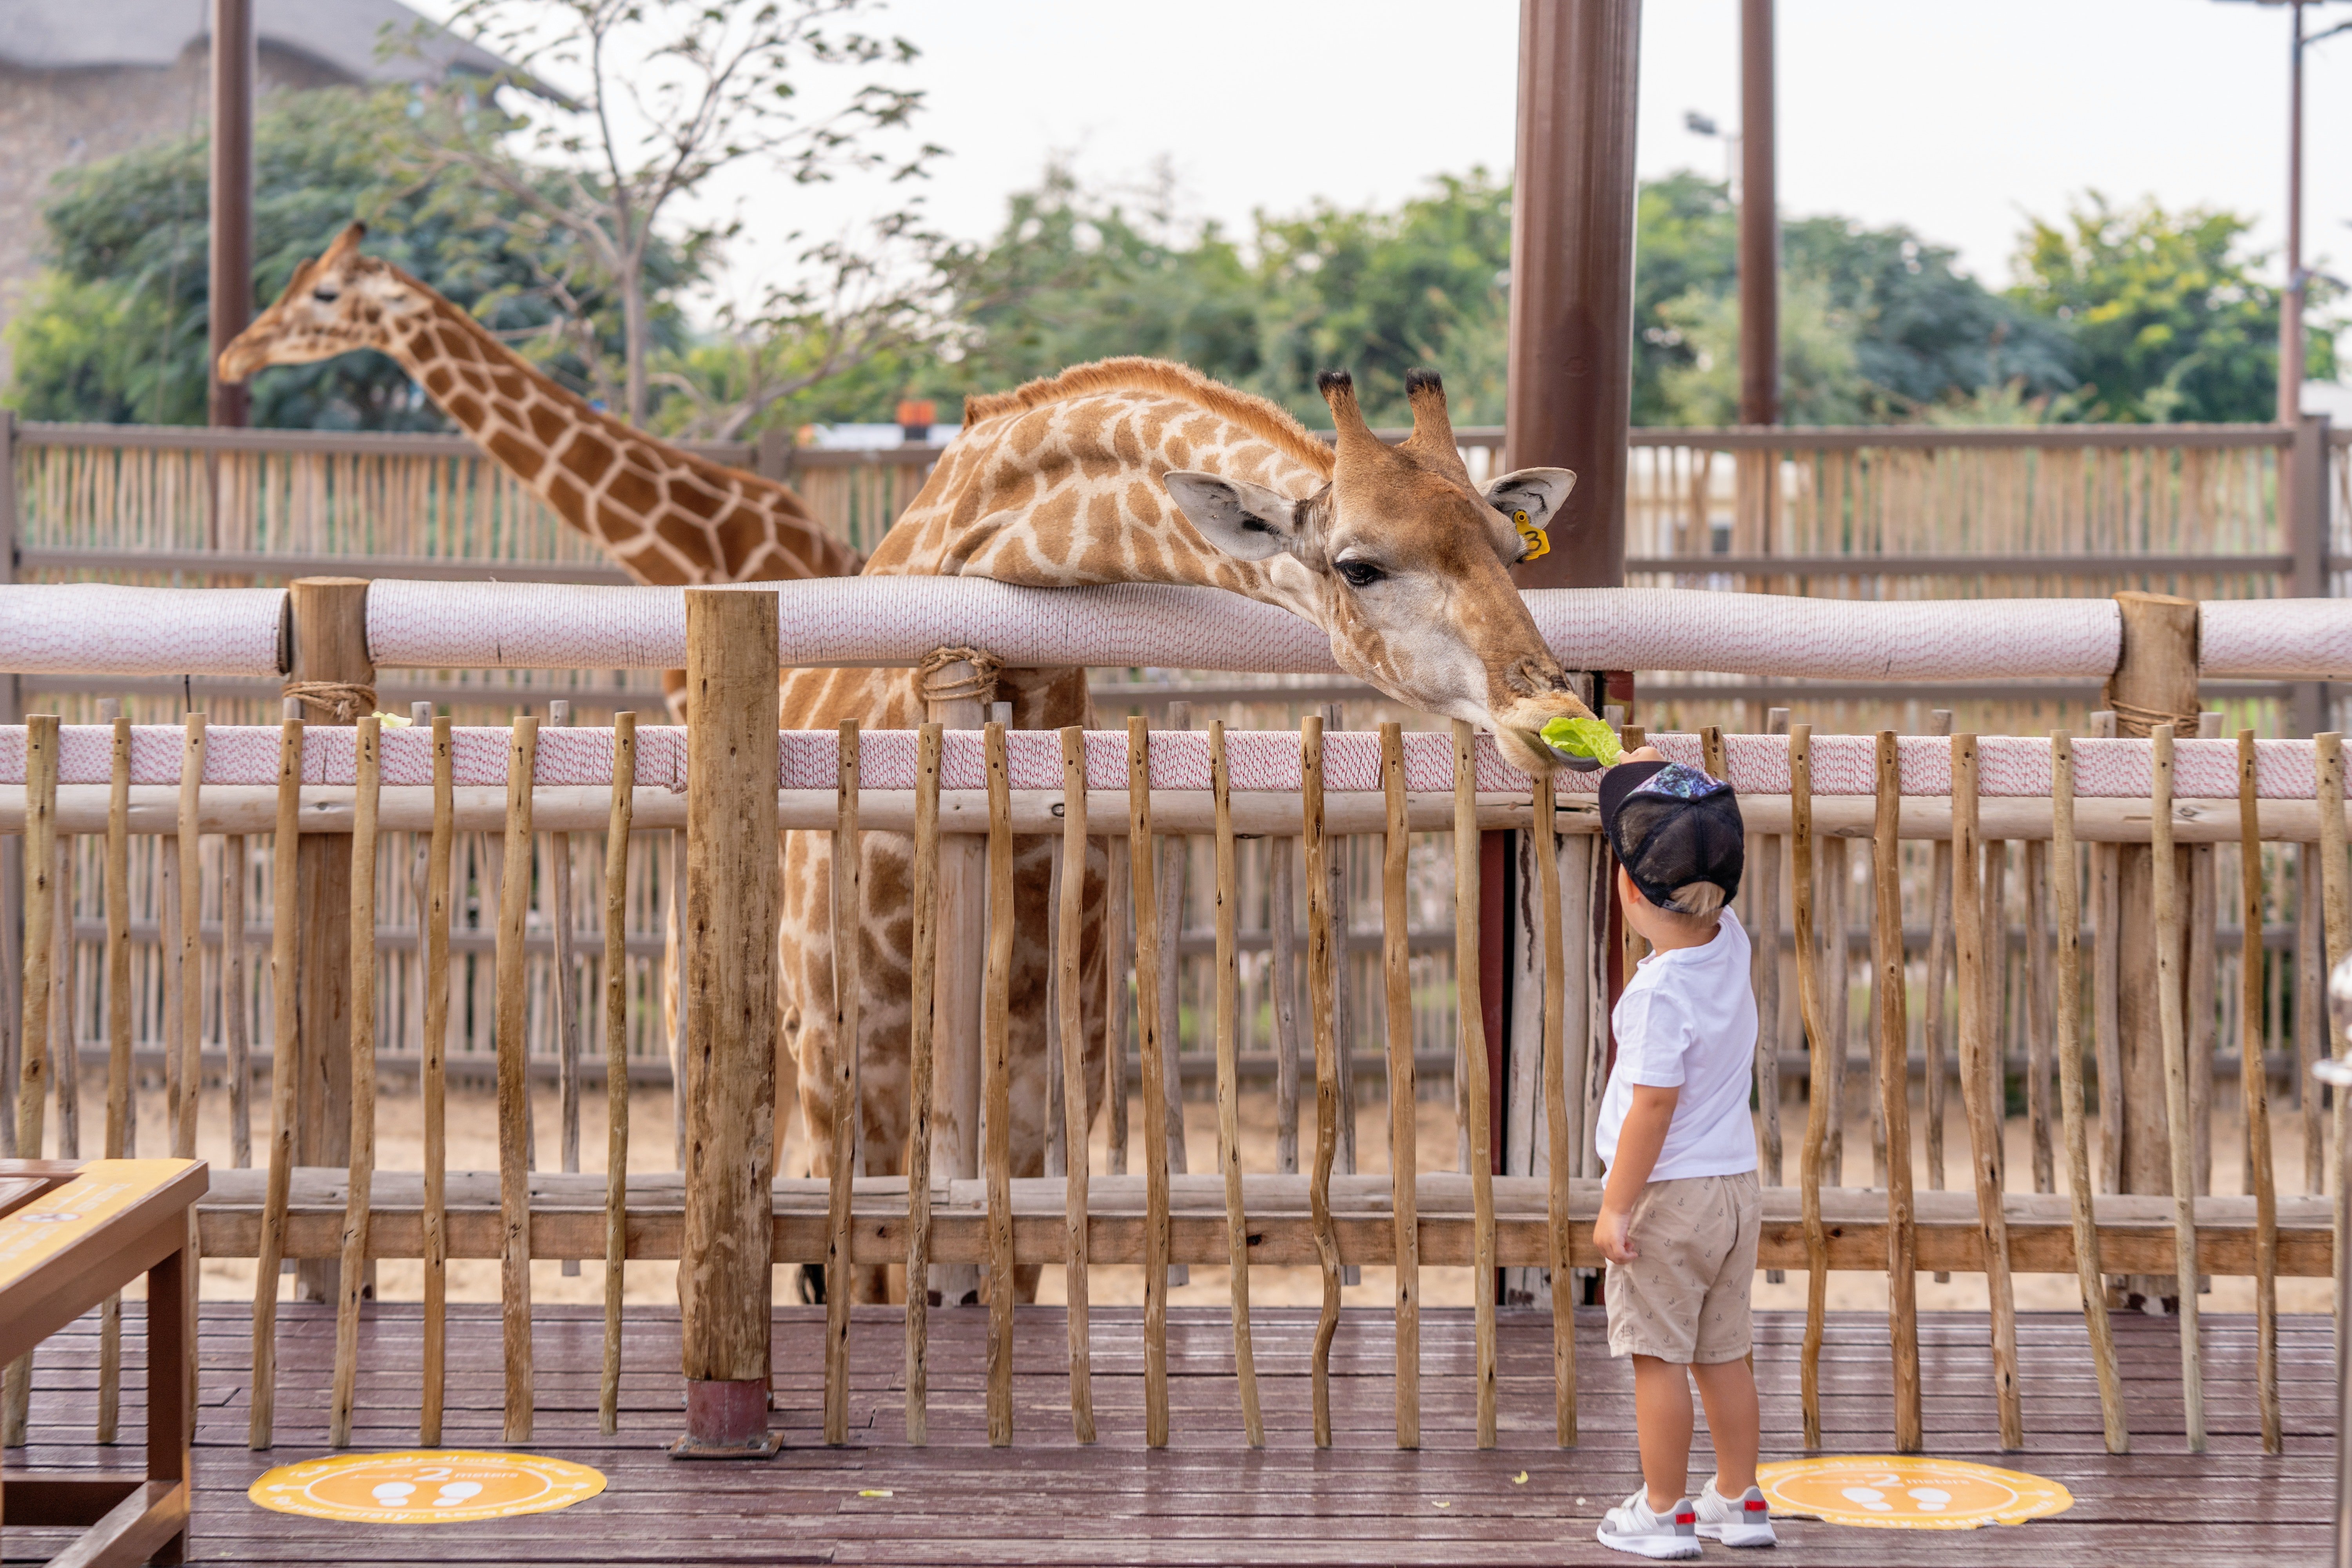 The family enjoyed their day at the zoo and went home with happy hearts. | Source: Pexels